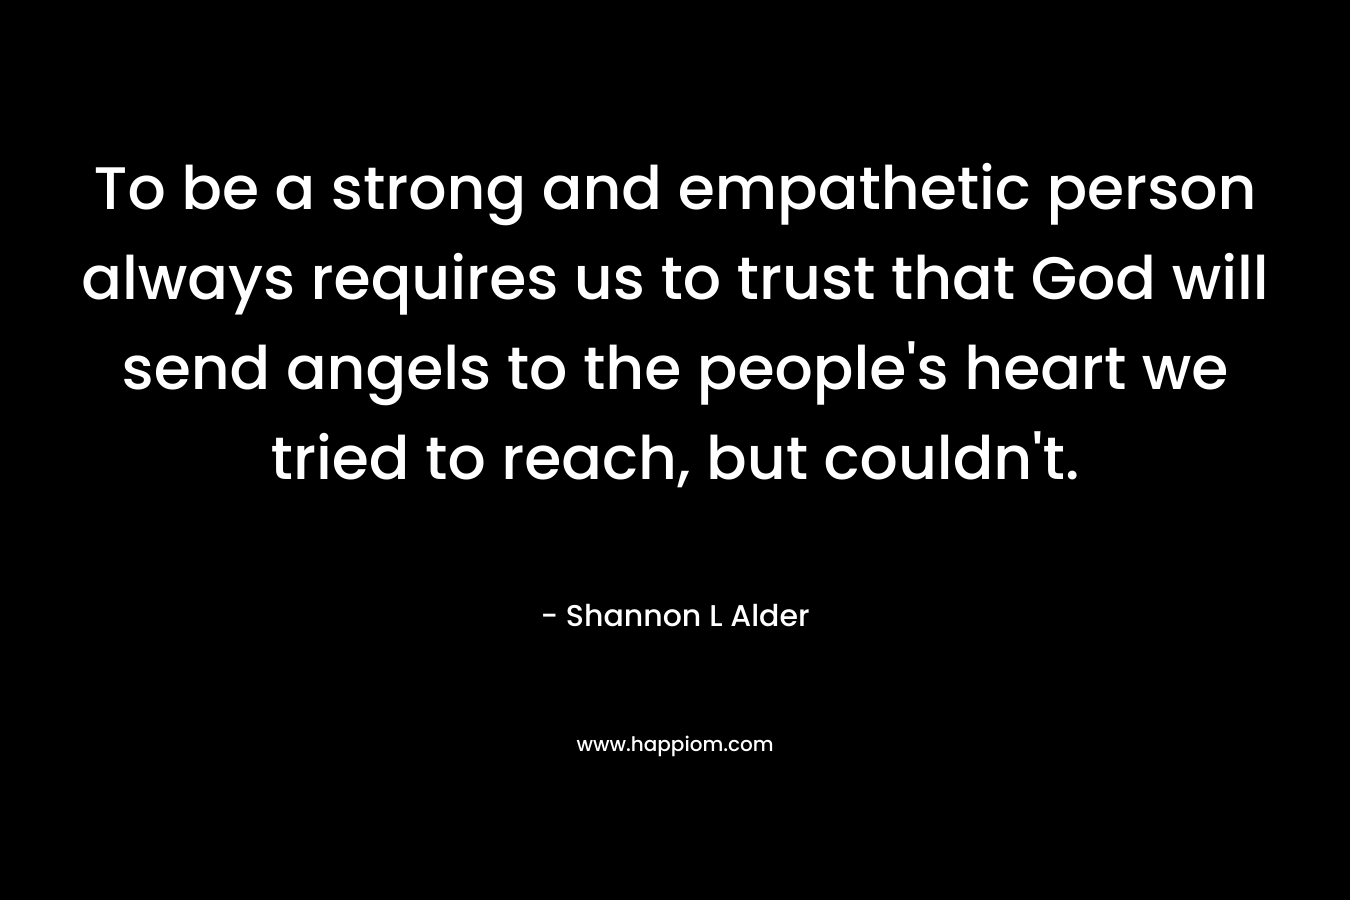 To be a strong and empathetic person always requires us to trust that God will send angels to the people's heart we tried to reach, but couldn't.